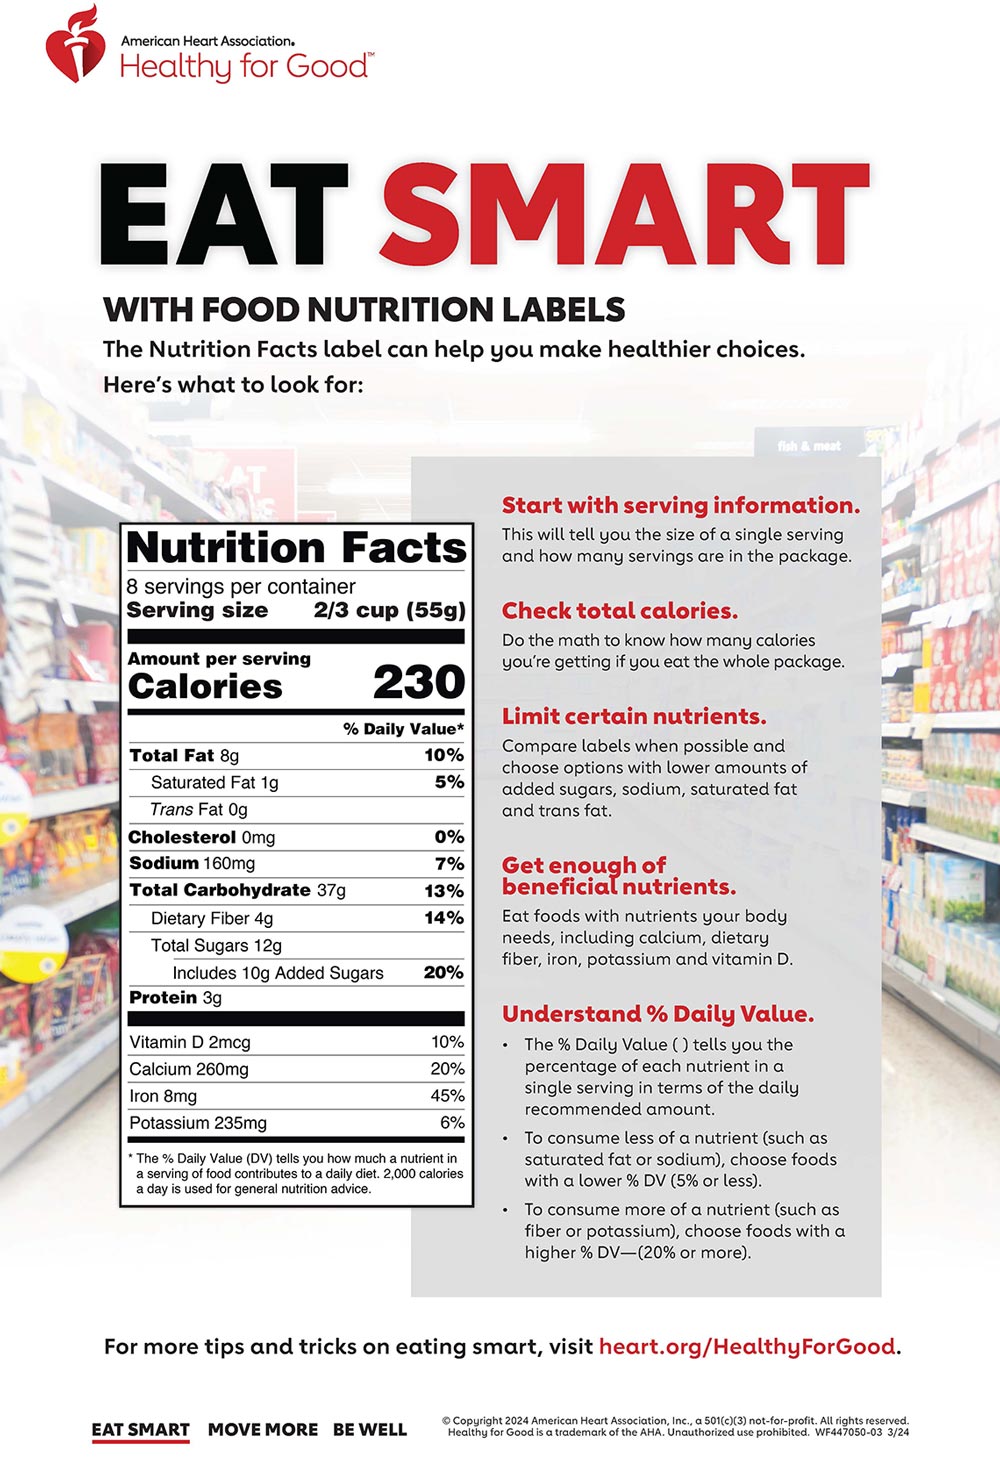 Making the Most of the Nutrition Facts Label Infographic